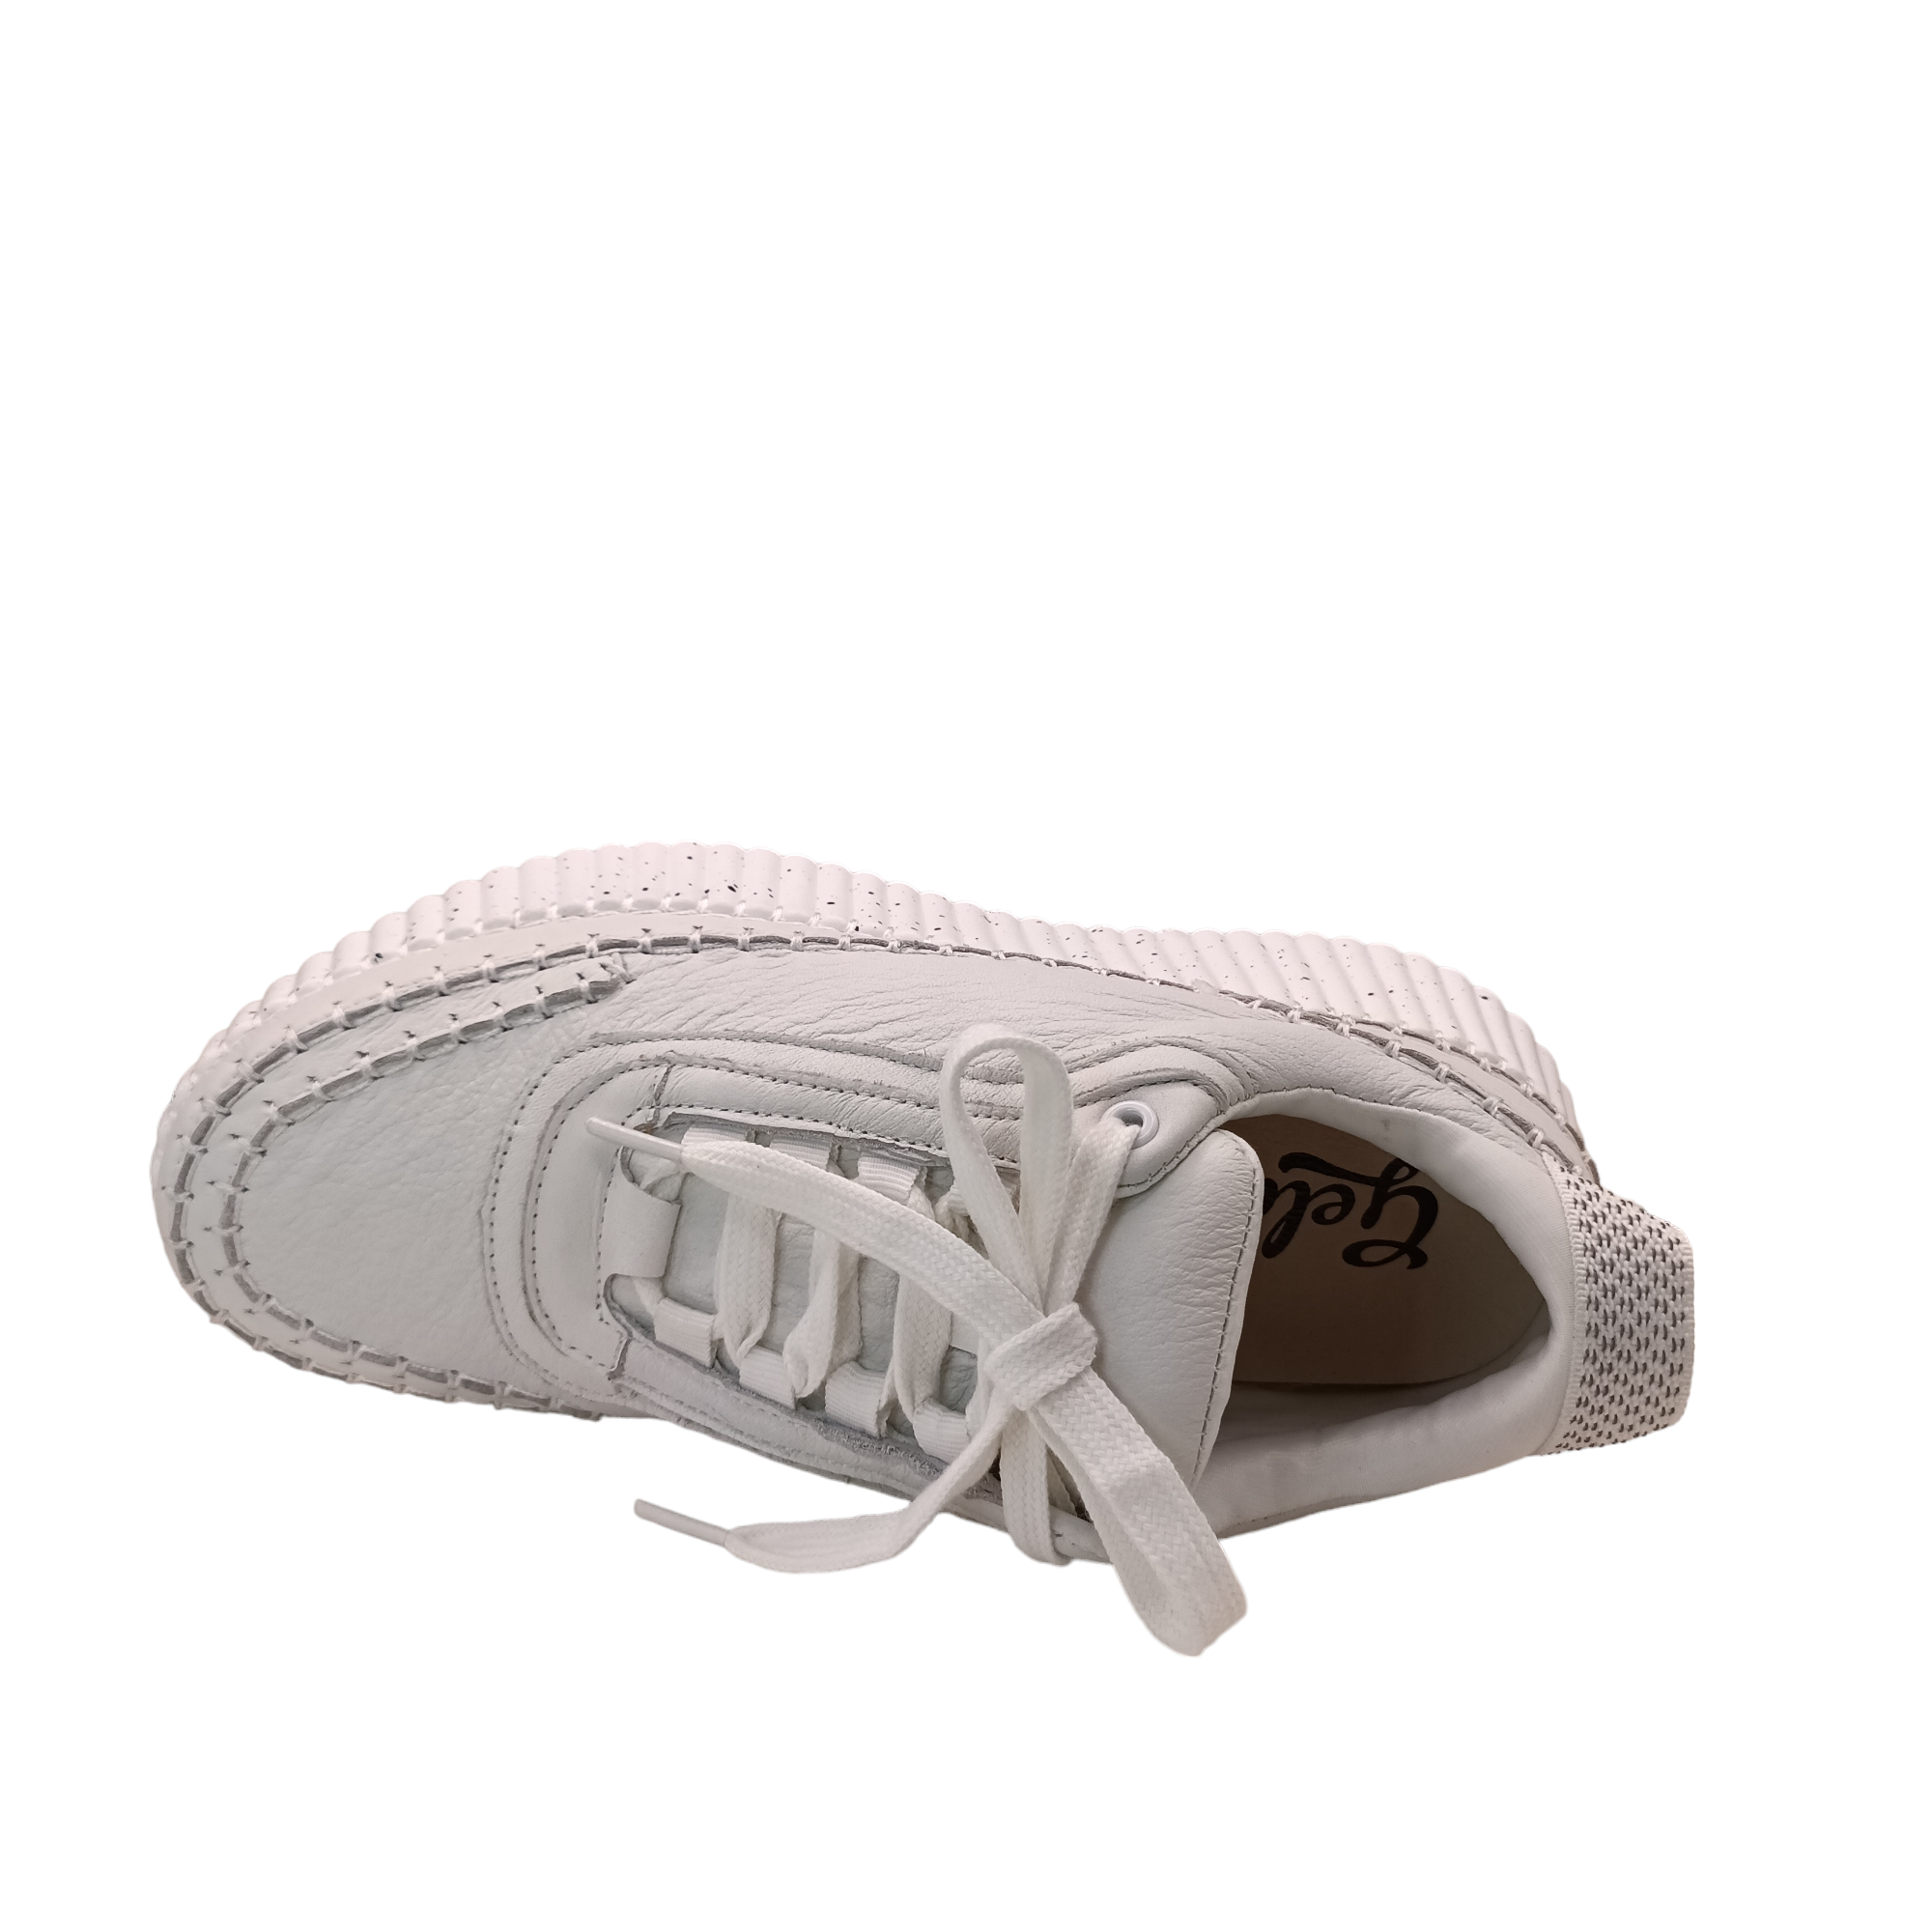 Shop Pluto - with shoe&me - from Gelato - Sneakers - Sneakers, Winter, Womens